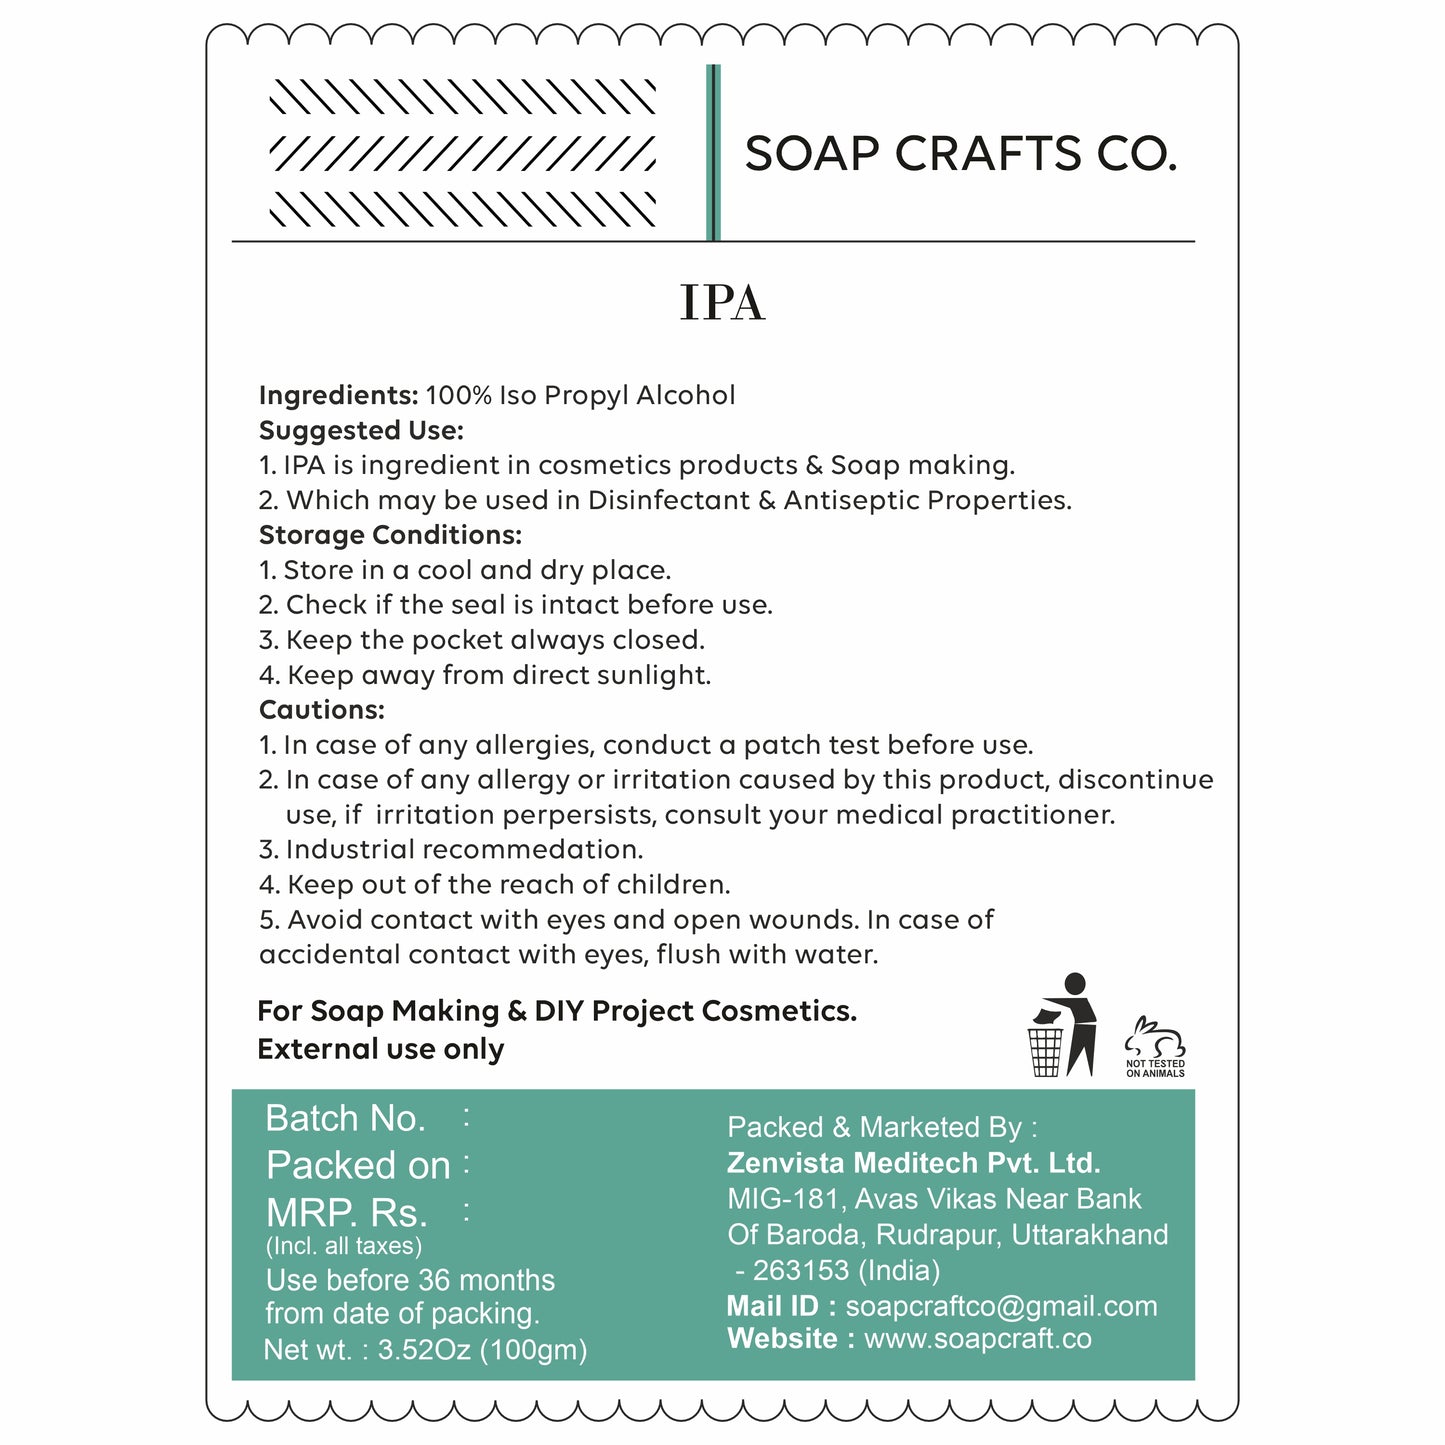 cosmeticmaking, saopmaking, cosmeticmakingingredients, soapmakingingredients,cosmeticingredients,naturalingredients,organicingredients,veganingredients, essentialoils,fragranceoils,carrieroils, carrieroils, butters, clays,botanicals,herbs,preservatives,emulsifiers,surfa ctants,thickeners, thickeners,exfoliants, Iso propyl mystrate